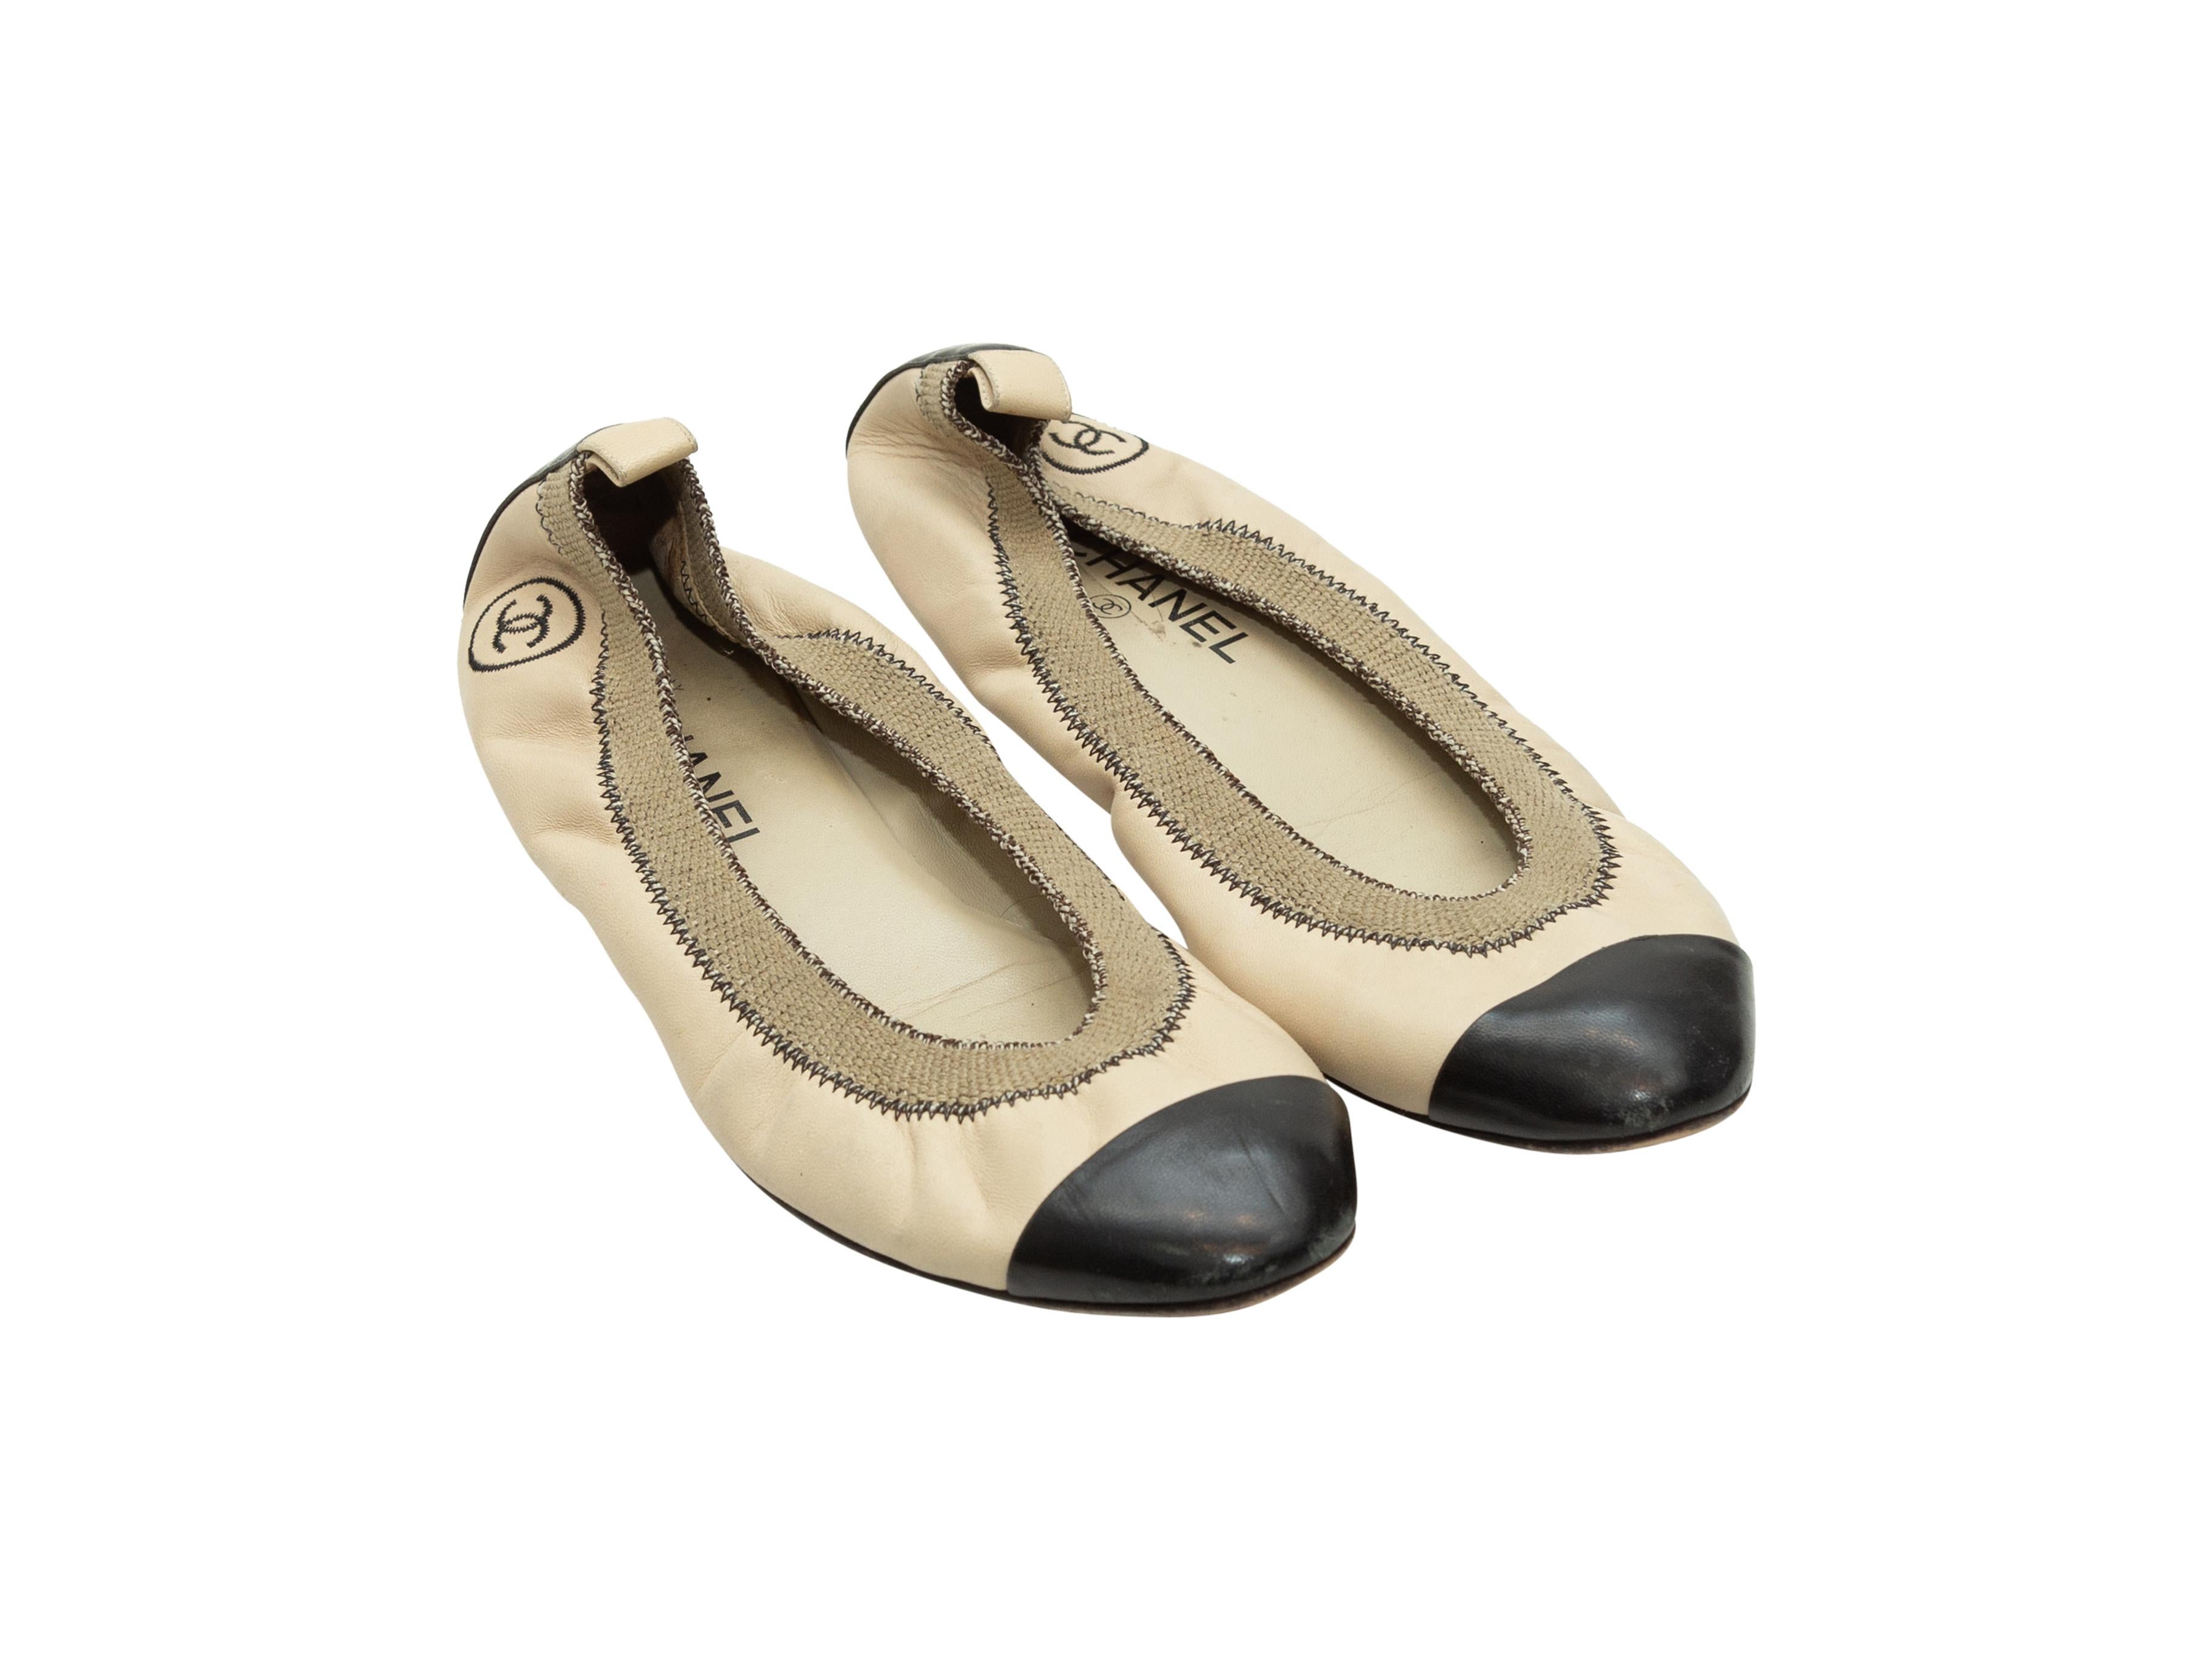 Product details: Tan and black cap-toe ballet flats by Chanel. CC embroidery at heels. Designer size 41. 
Condition: Pre-owned. Good. Wear throughout.